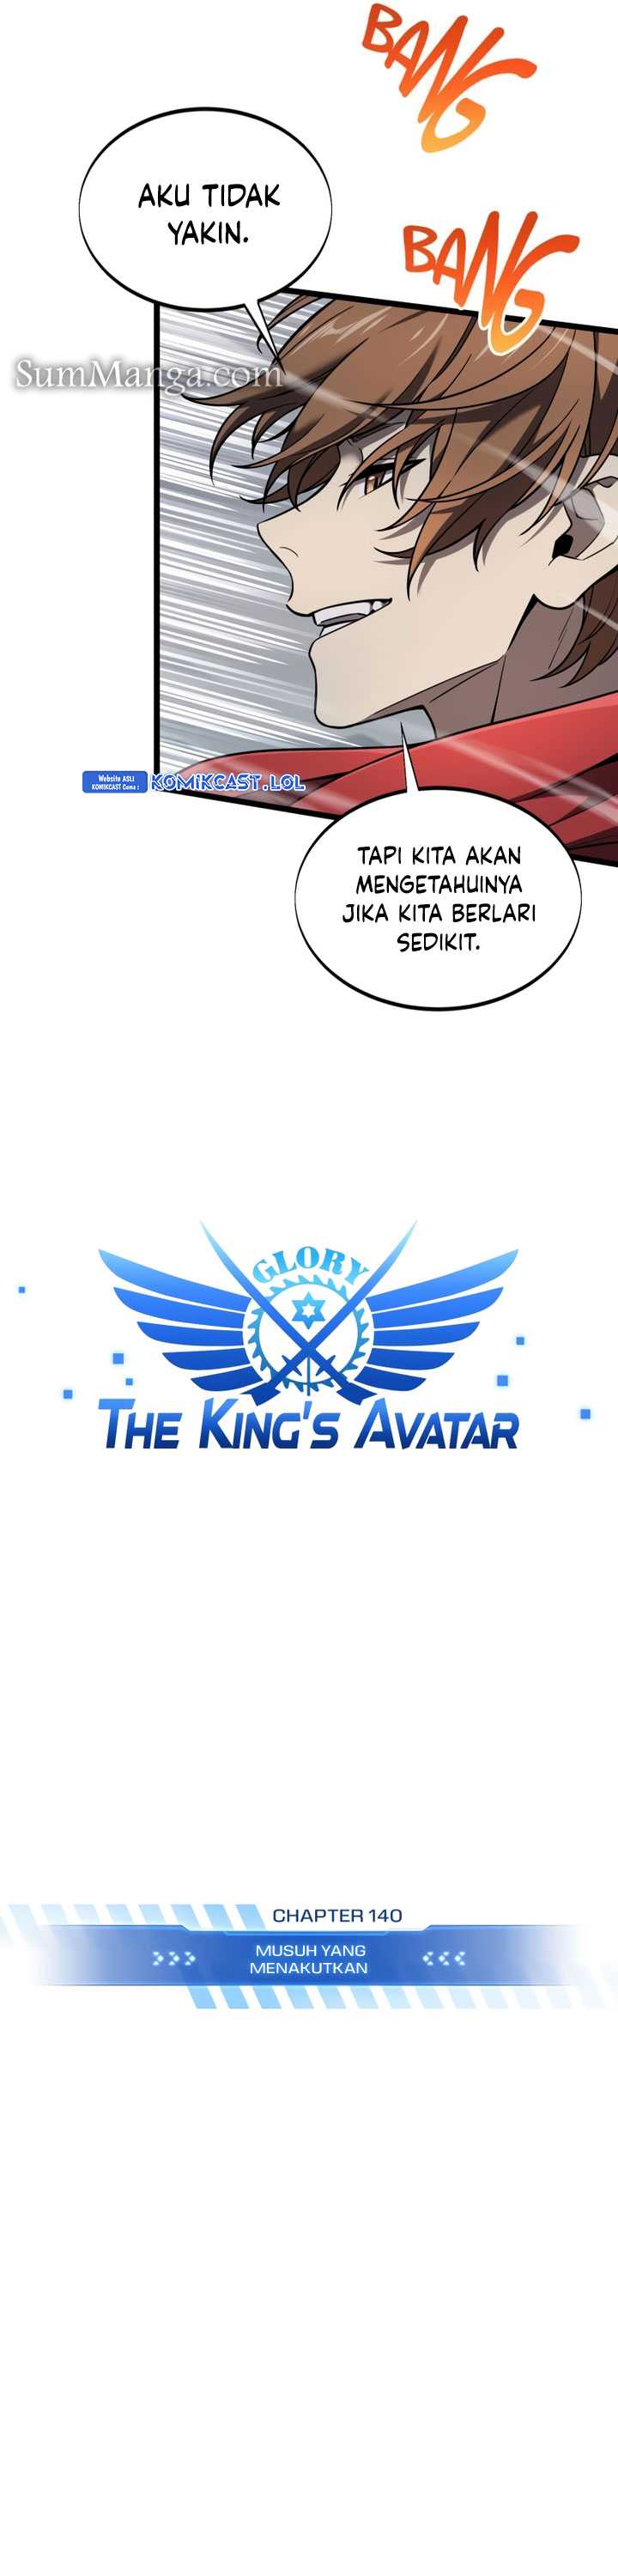 The King’s Avatar Chapter 140